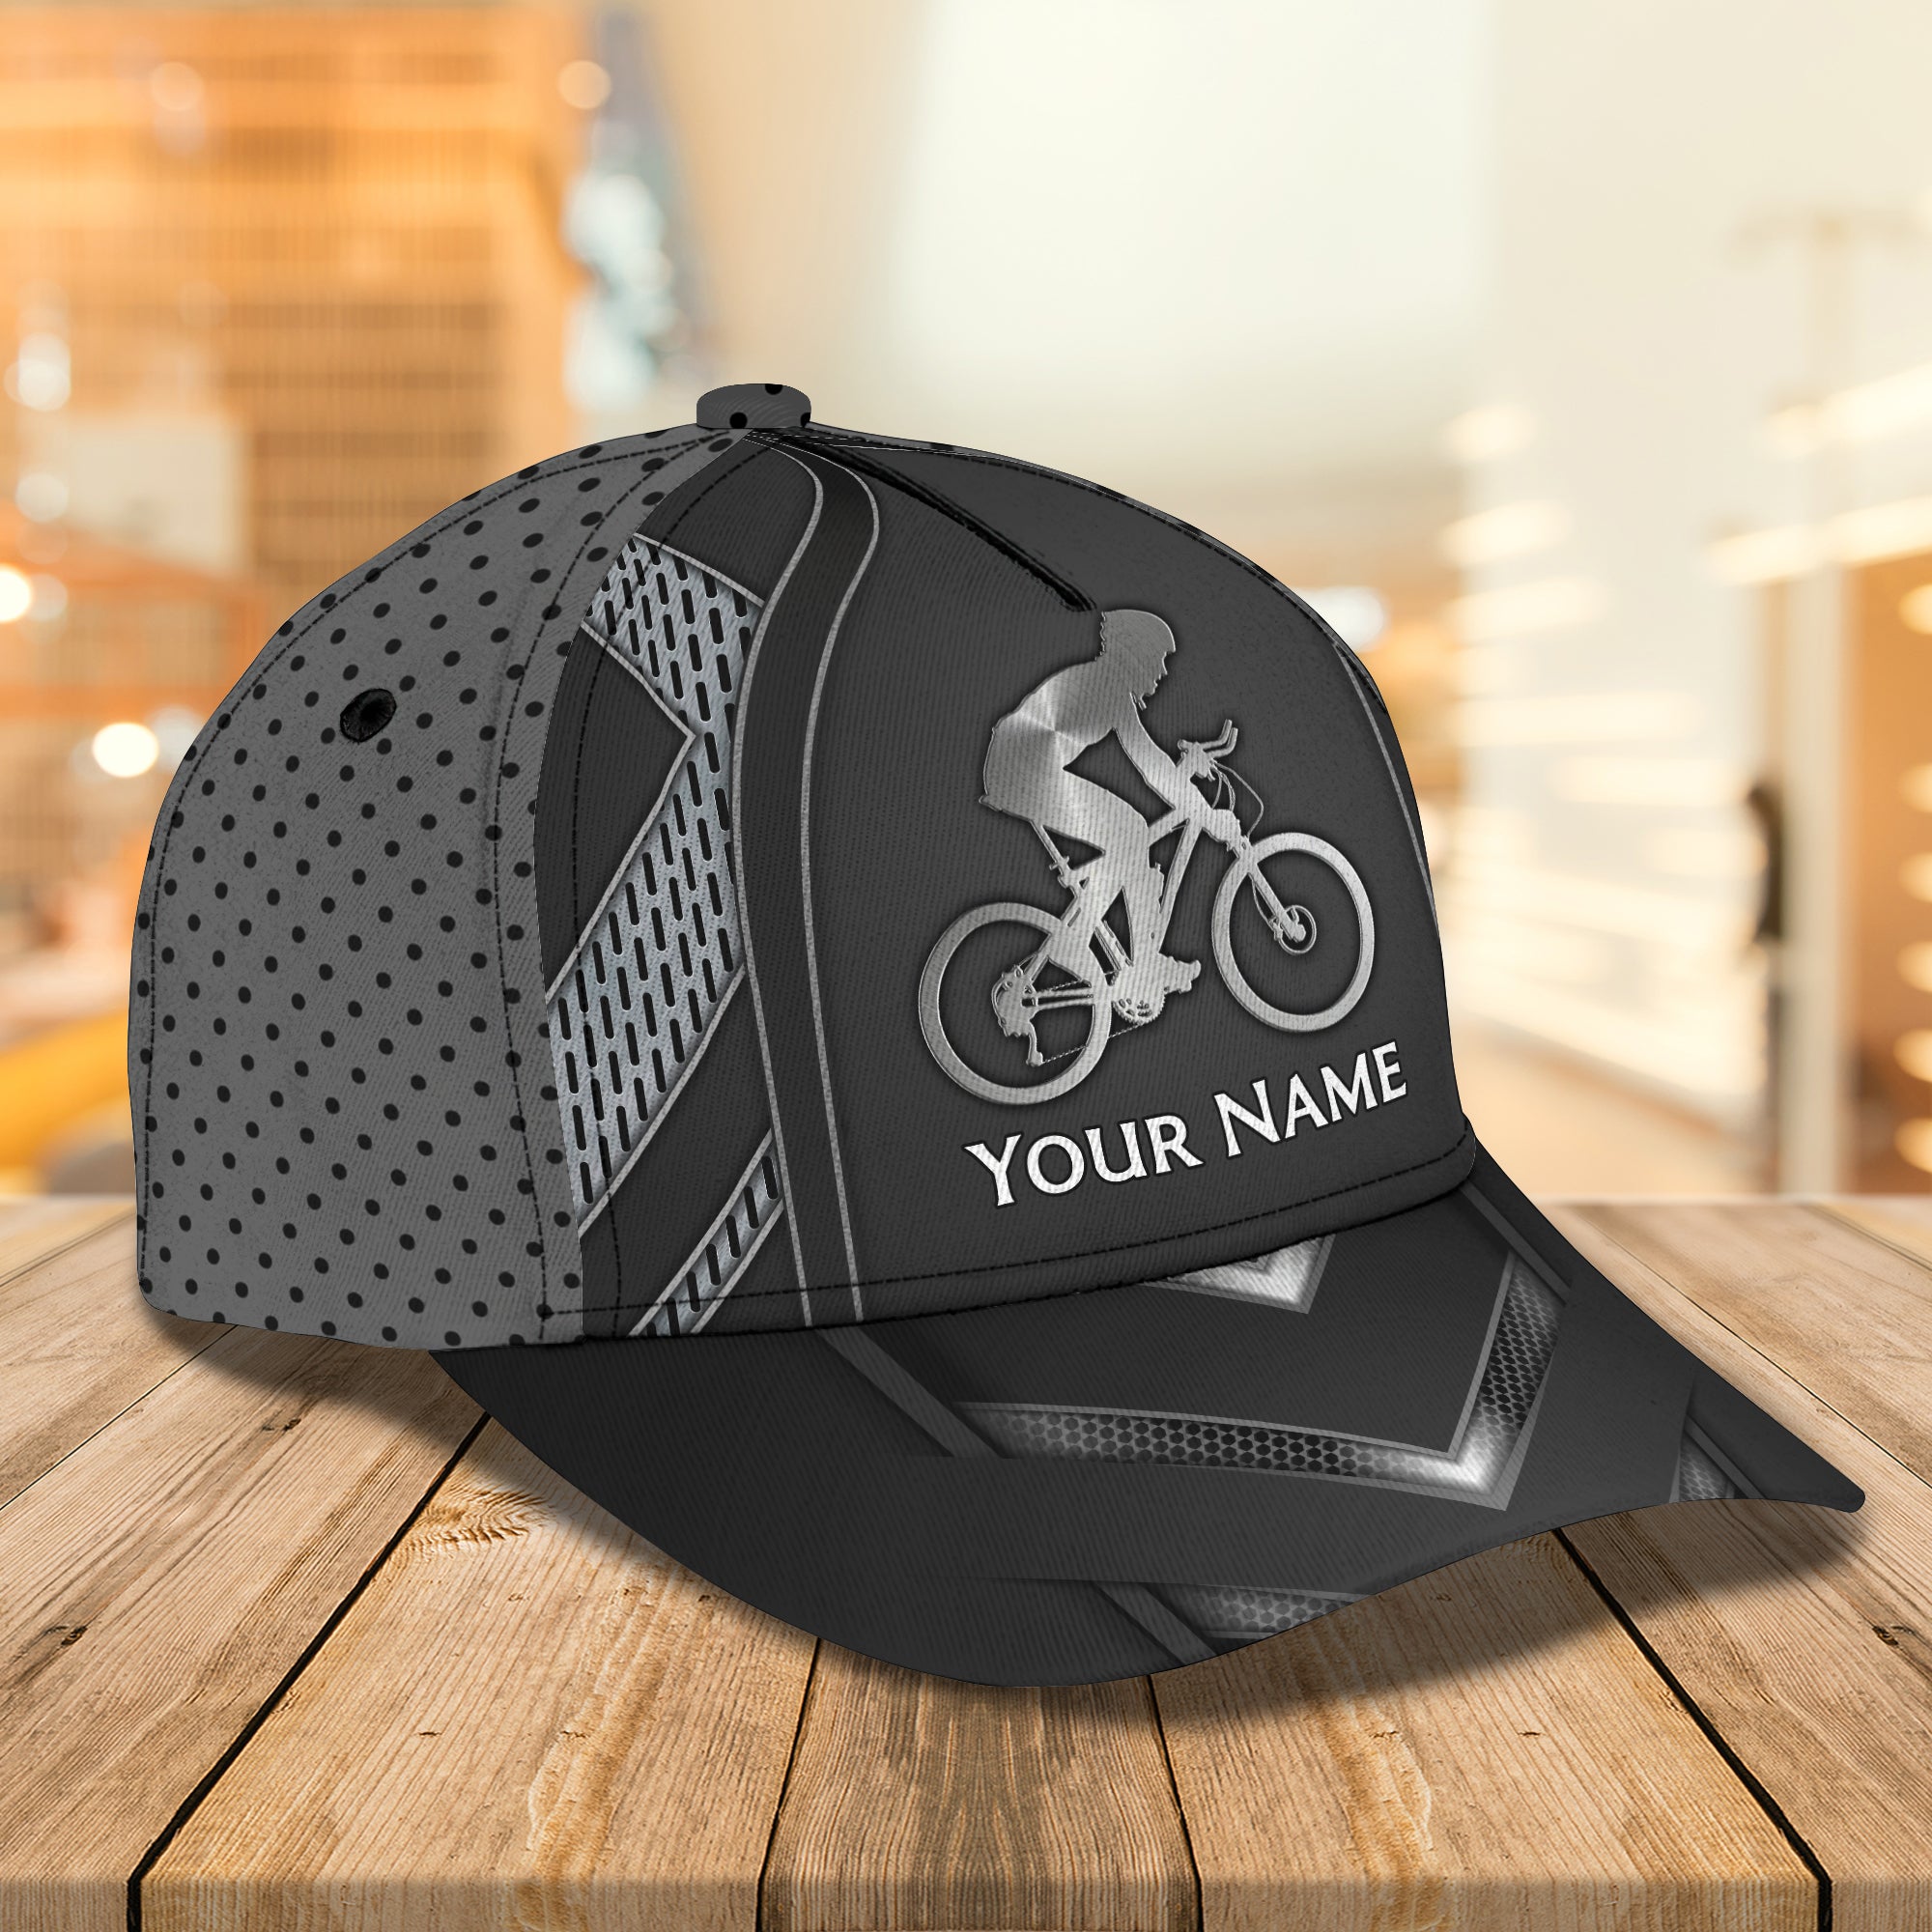 BICYCLE CAP1 - Personalized Name Cap - BY97